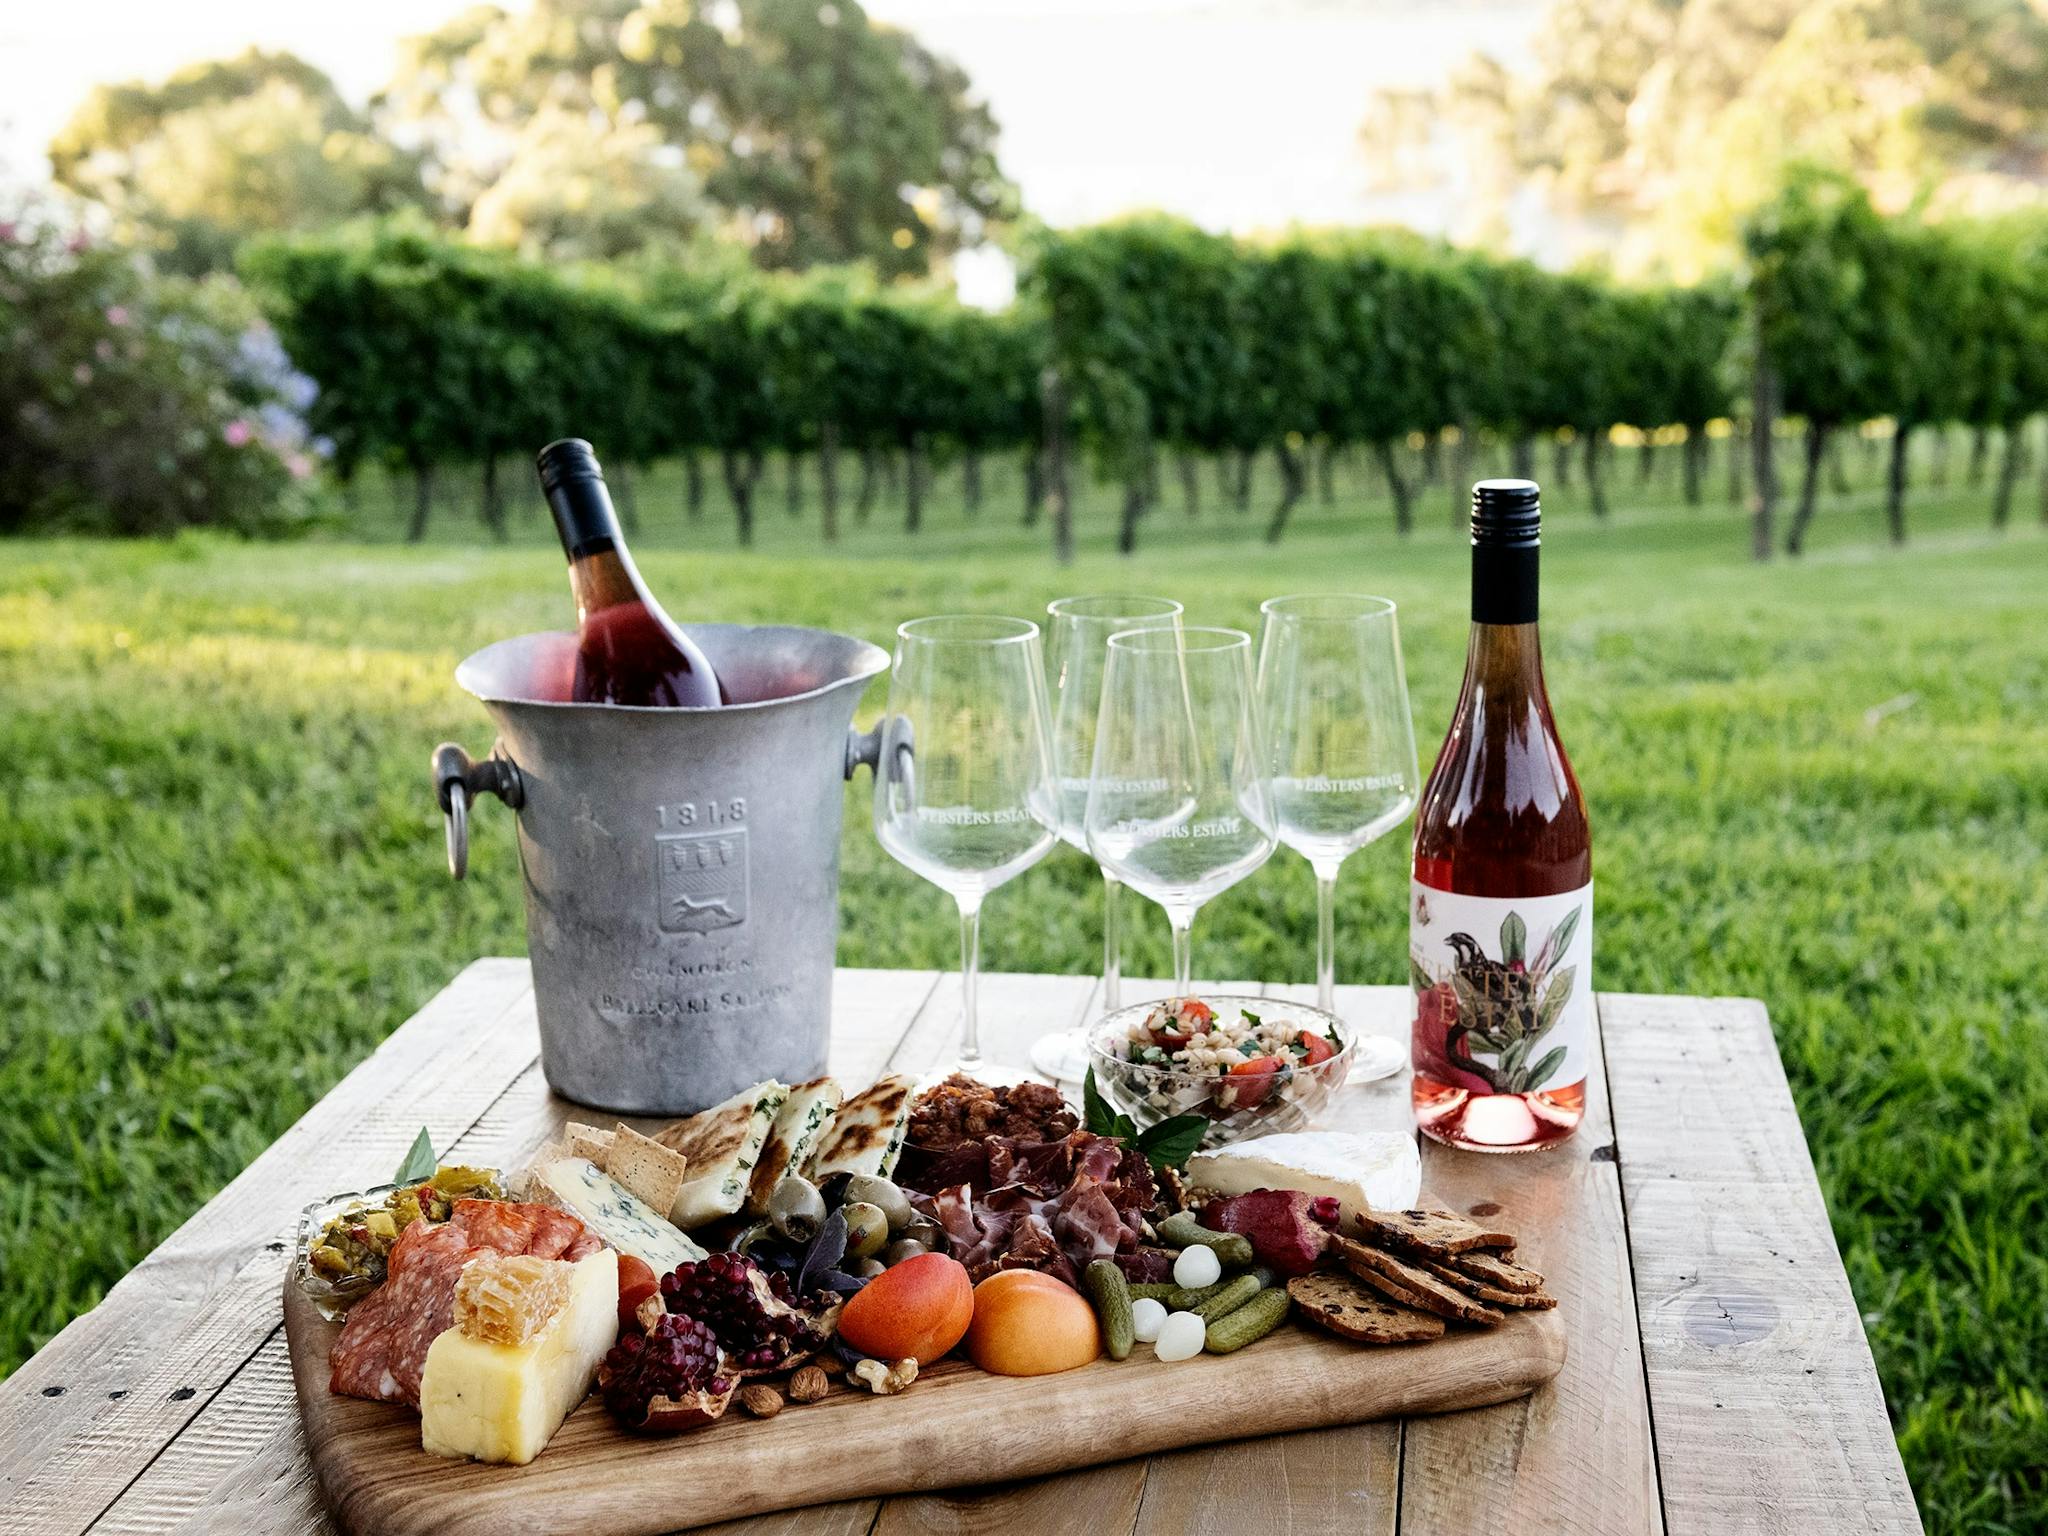 Wine and Grazing platter on a table by the vines